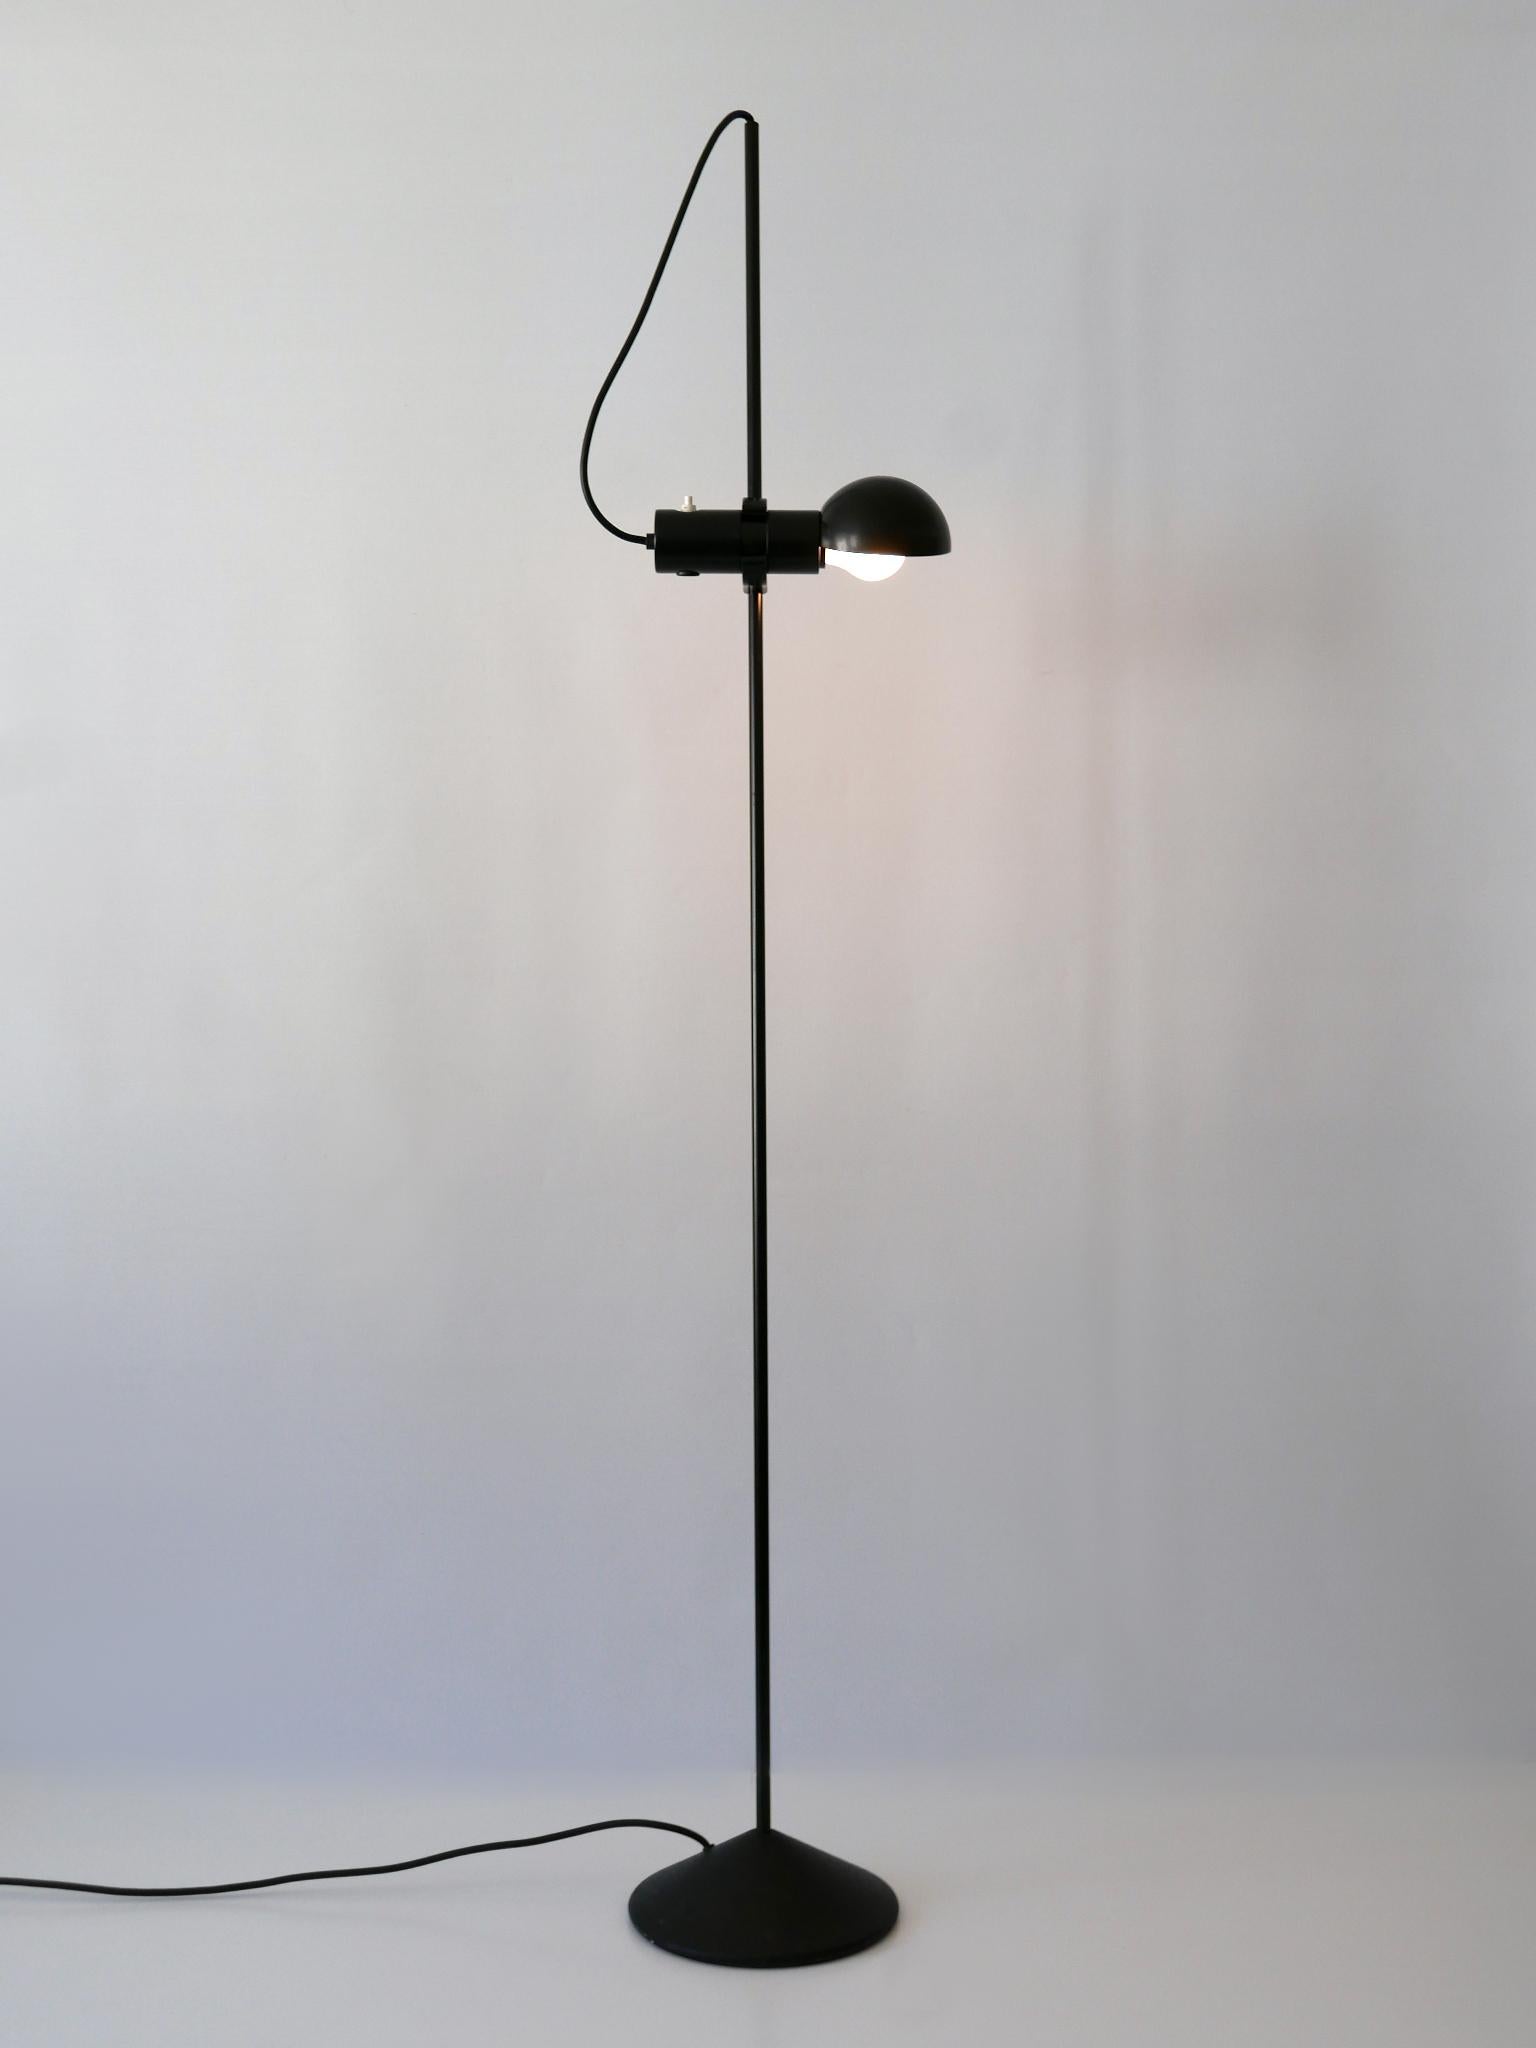 Rare Floor Lamp or Reading Light by Barbieri e Marianelli for Tronconi 1970s For Sale 6